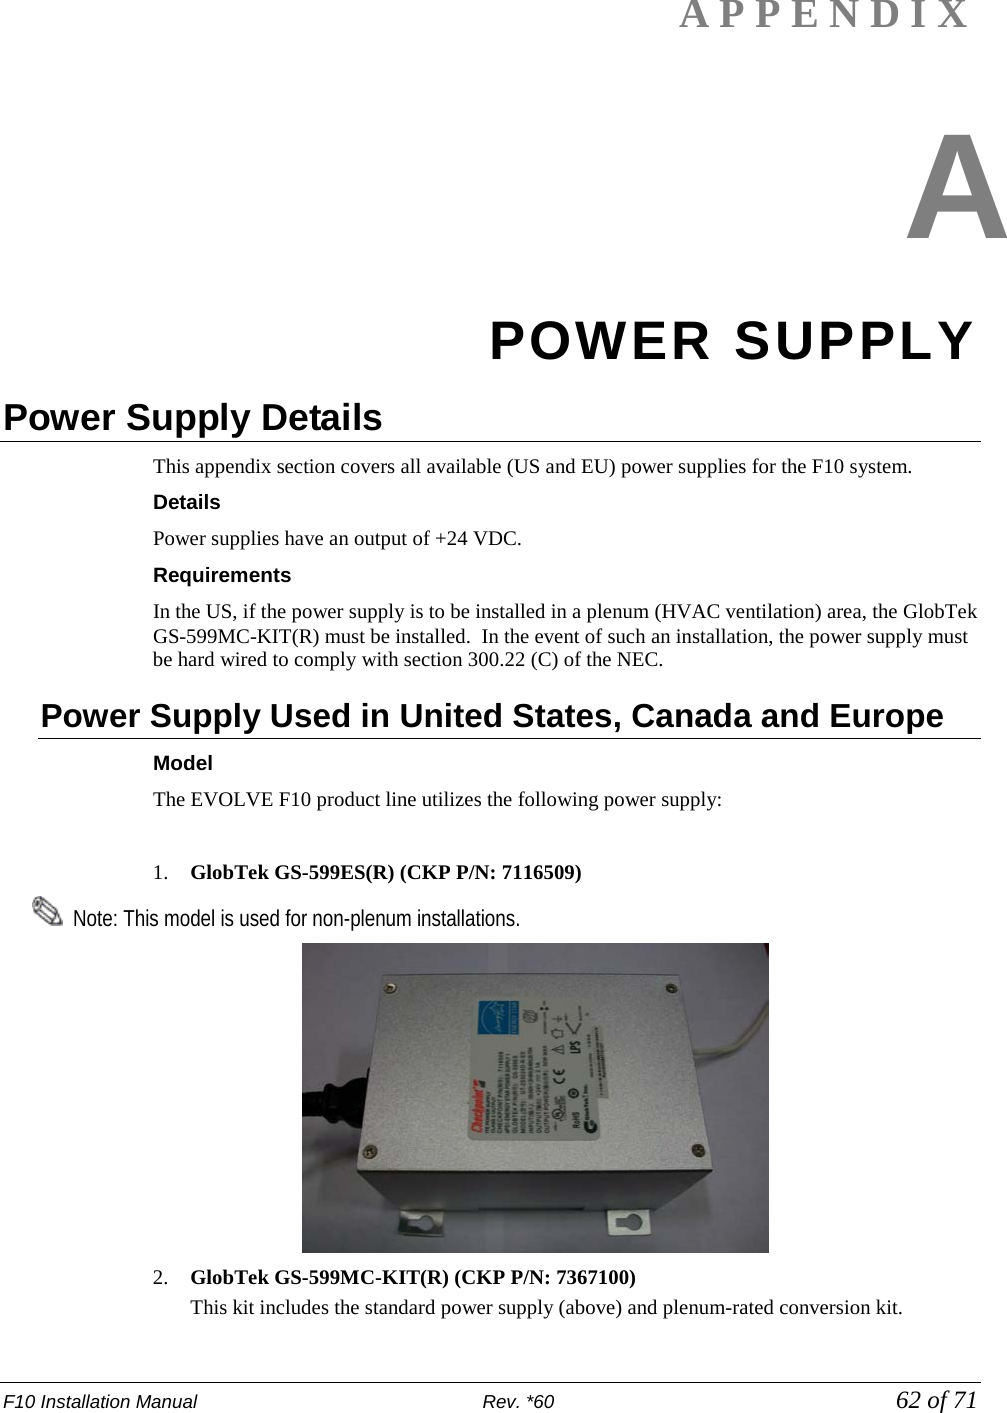 F10 Installation Manual                          Rev. *60            62 of 71 APPENDIX  A POWER SUPPLY Power Supply Details   This appendix section covers all available (US and EU) power supplies for the F10 system.  Details Power supplies have an output of +24 VDC.   Requirements In the US, if the power supply is to be installed in a plenum (HVAC ventilation) area, the GlobTek GS-599MC-KIT(R) must be installed.  In the event of such an installation, the power supply must be hard wired to comply with section 300.22 (C) of the NEC.  Power Supply Used in United States, Canada and Europe   Model  The EVOLVE F10 product line utilizes the following power supply:  1. GlobTek GS-599ES(R) (CKP P/N: 7116509)   Note: This model is used for non-plenum installations.   2. GlobTek GS-599MC-KIT(R) (CKP P/N: 7367100)    This kit includes the standard power supply (above) and plenum-rated conversion kit. 